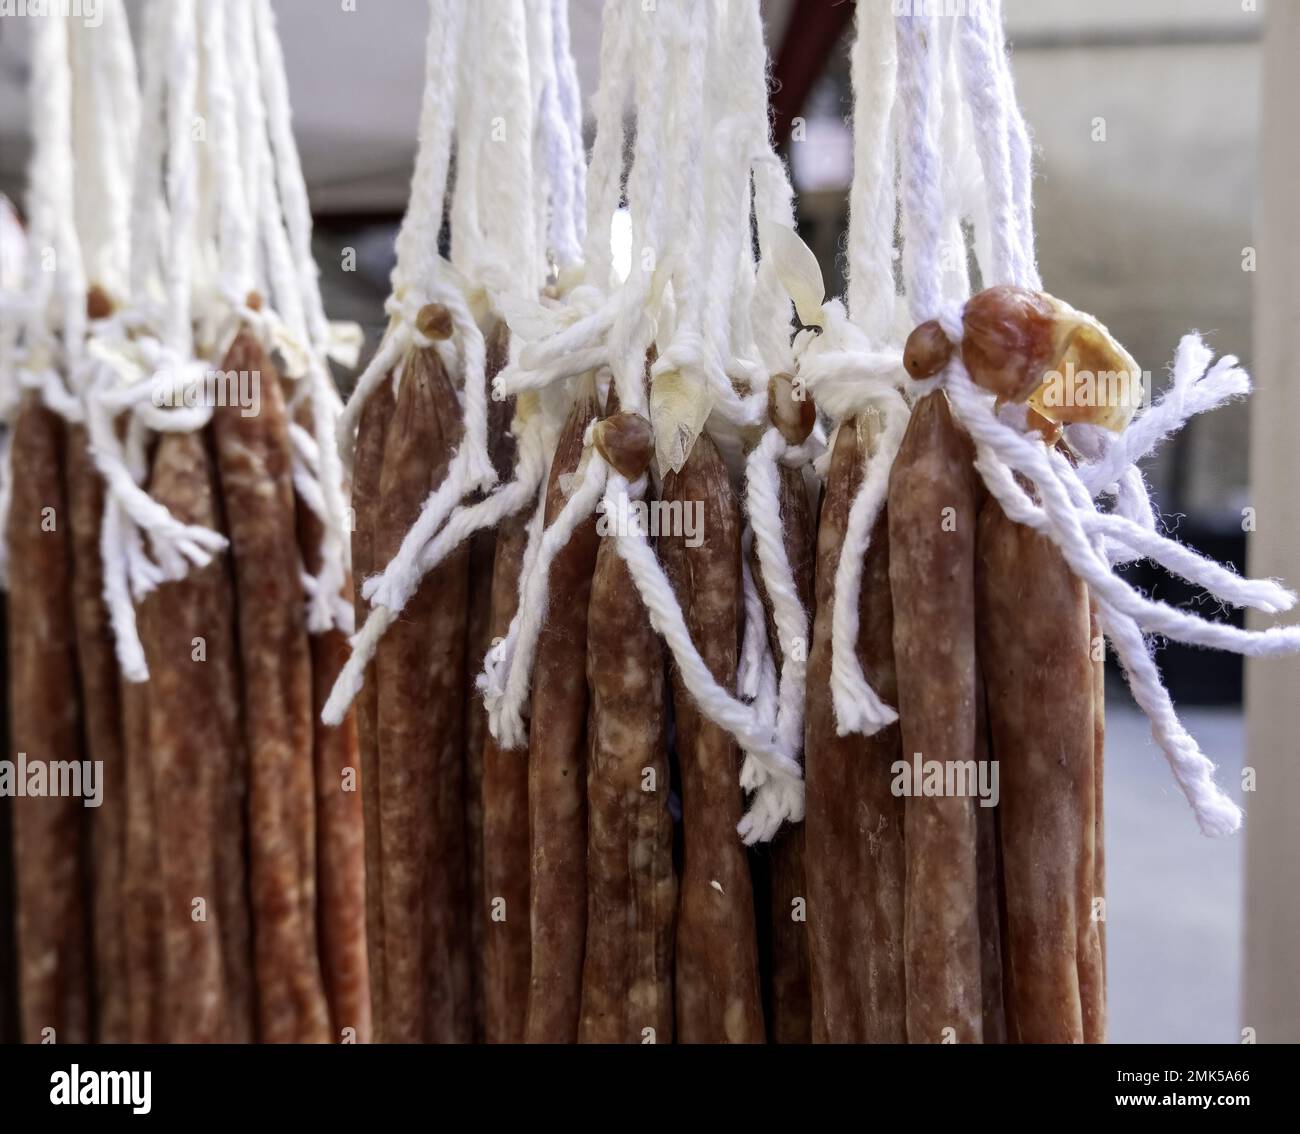 detail of dried pork, greasy food, diet Stock Photo